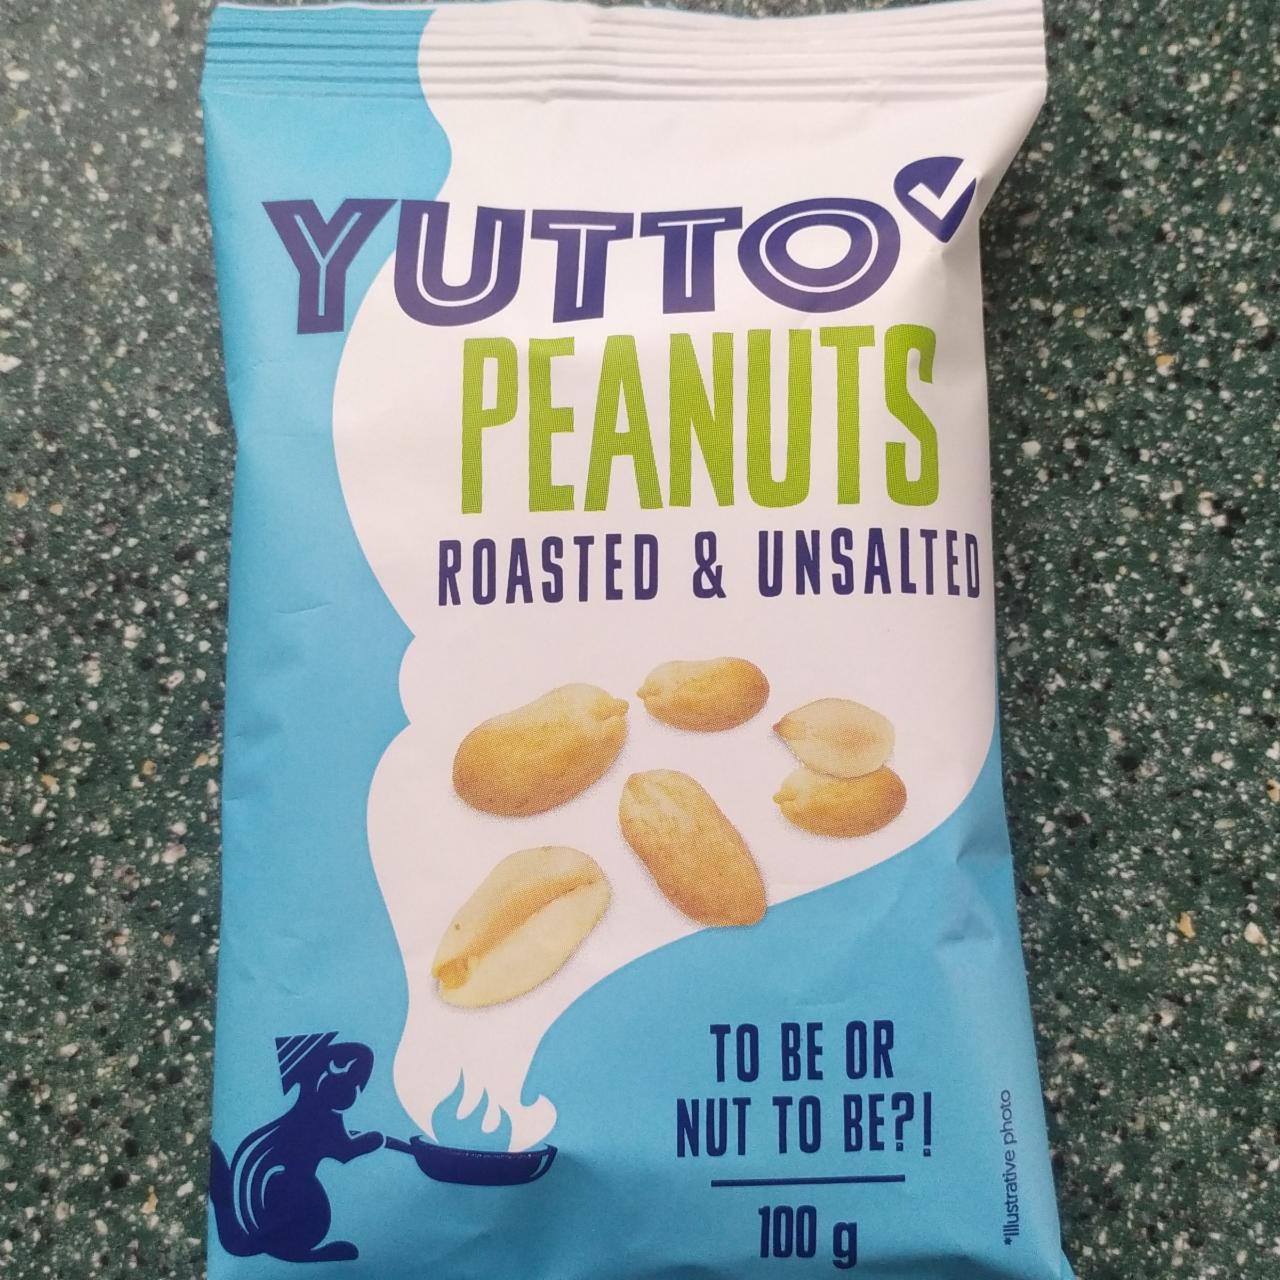 Fotografie - Peanuts roasted & unsalted Yutto